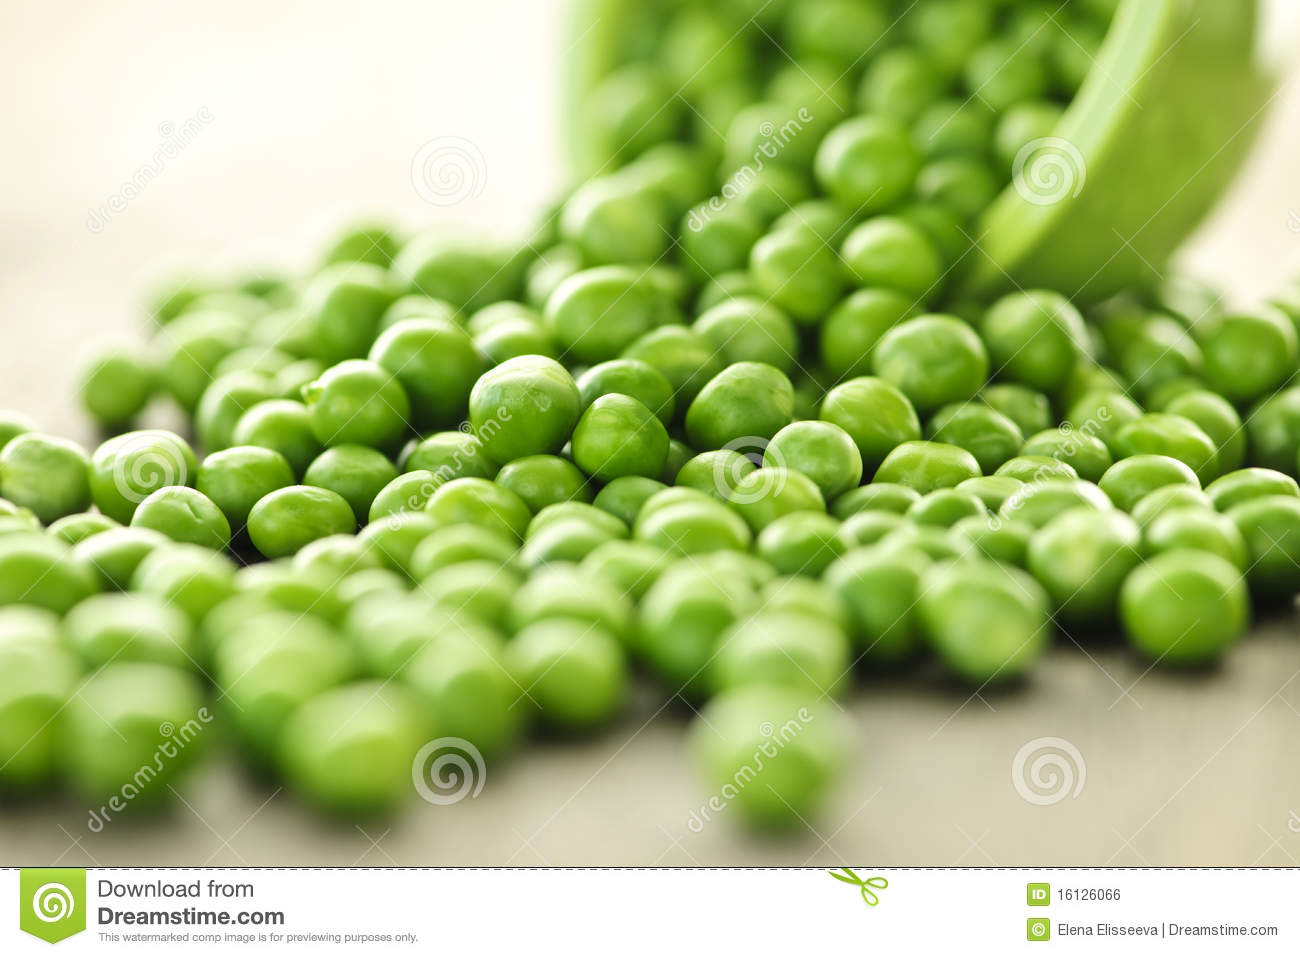 Spilled Bowl Of Green Peas Royalty Free Stock Image   Image  16126066